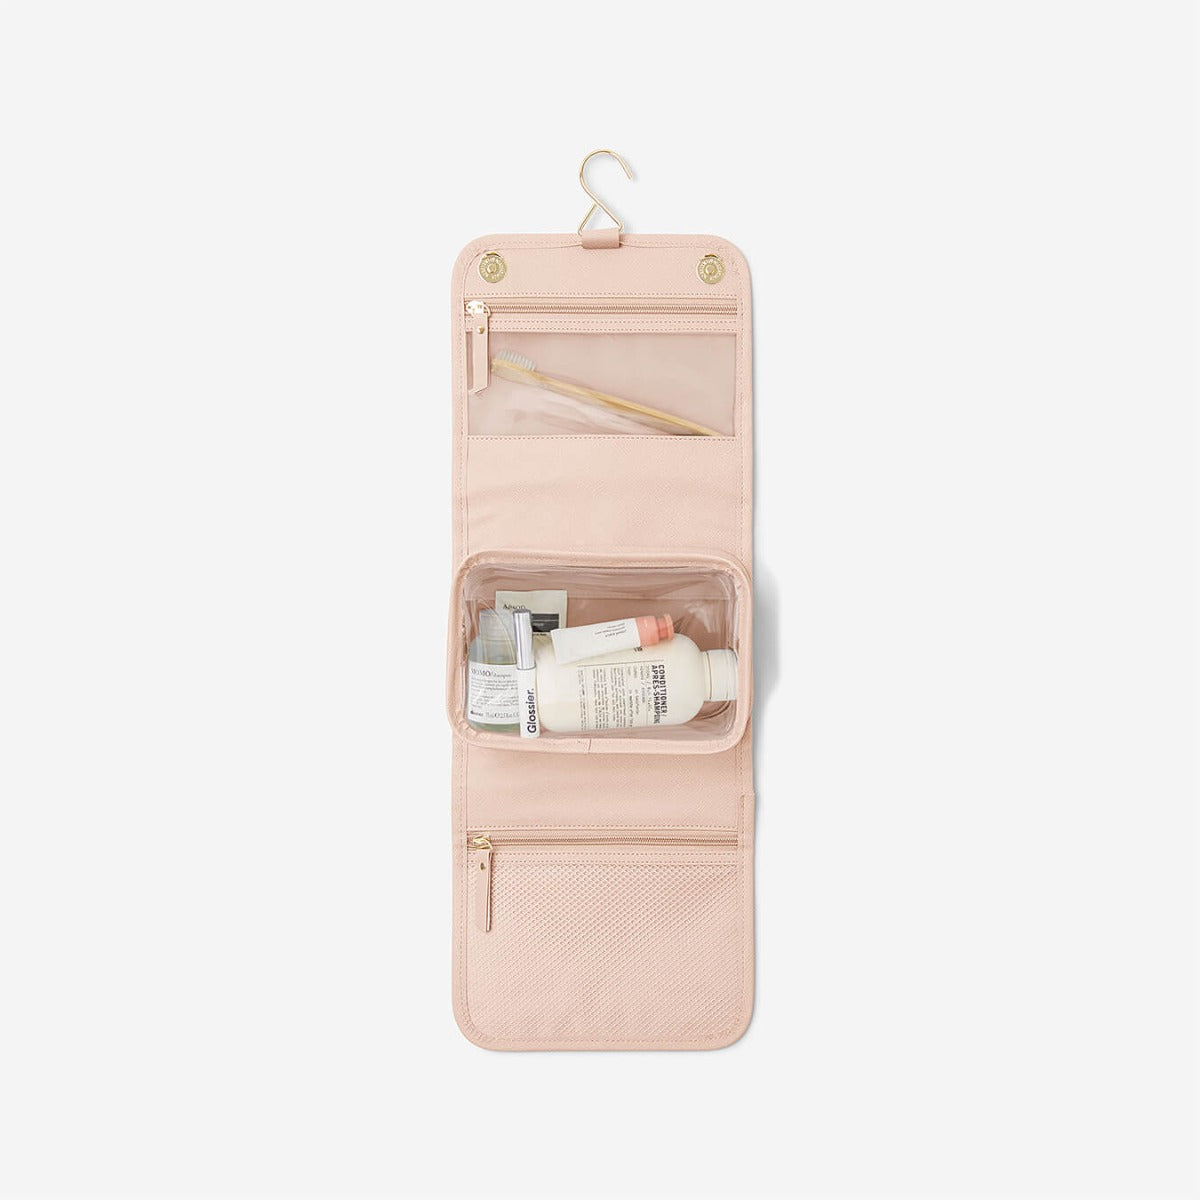 Stackers Ladies' Hanging Toiletry Make-up Bag - Blush - Small - Holiday Accent Ltd